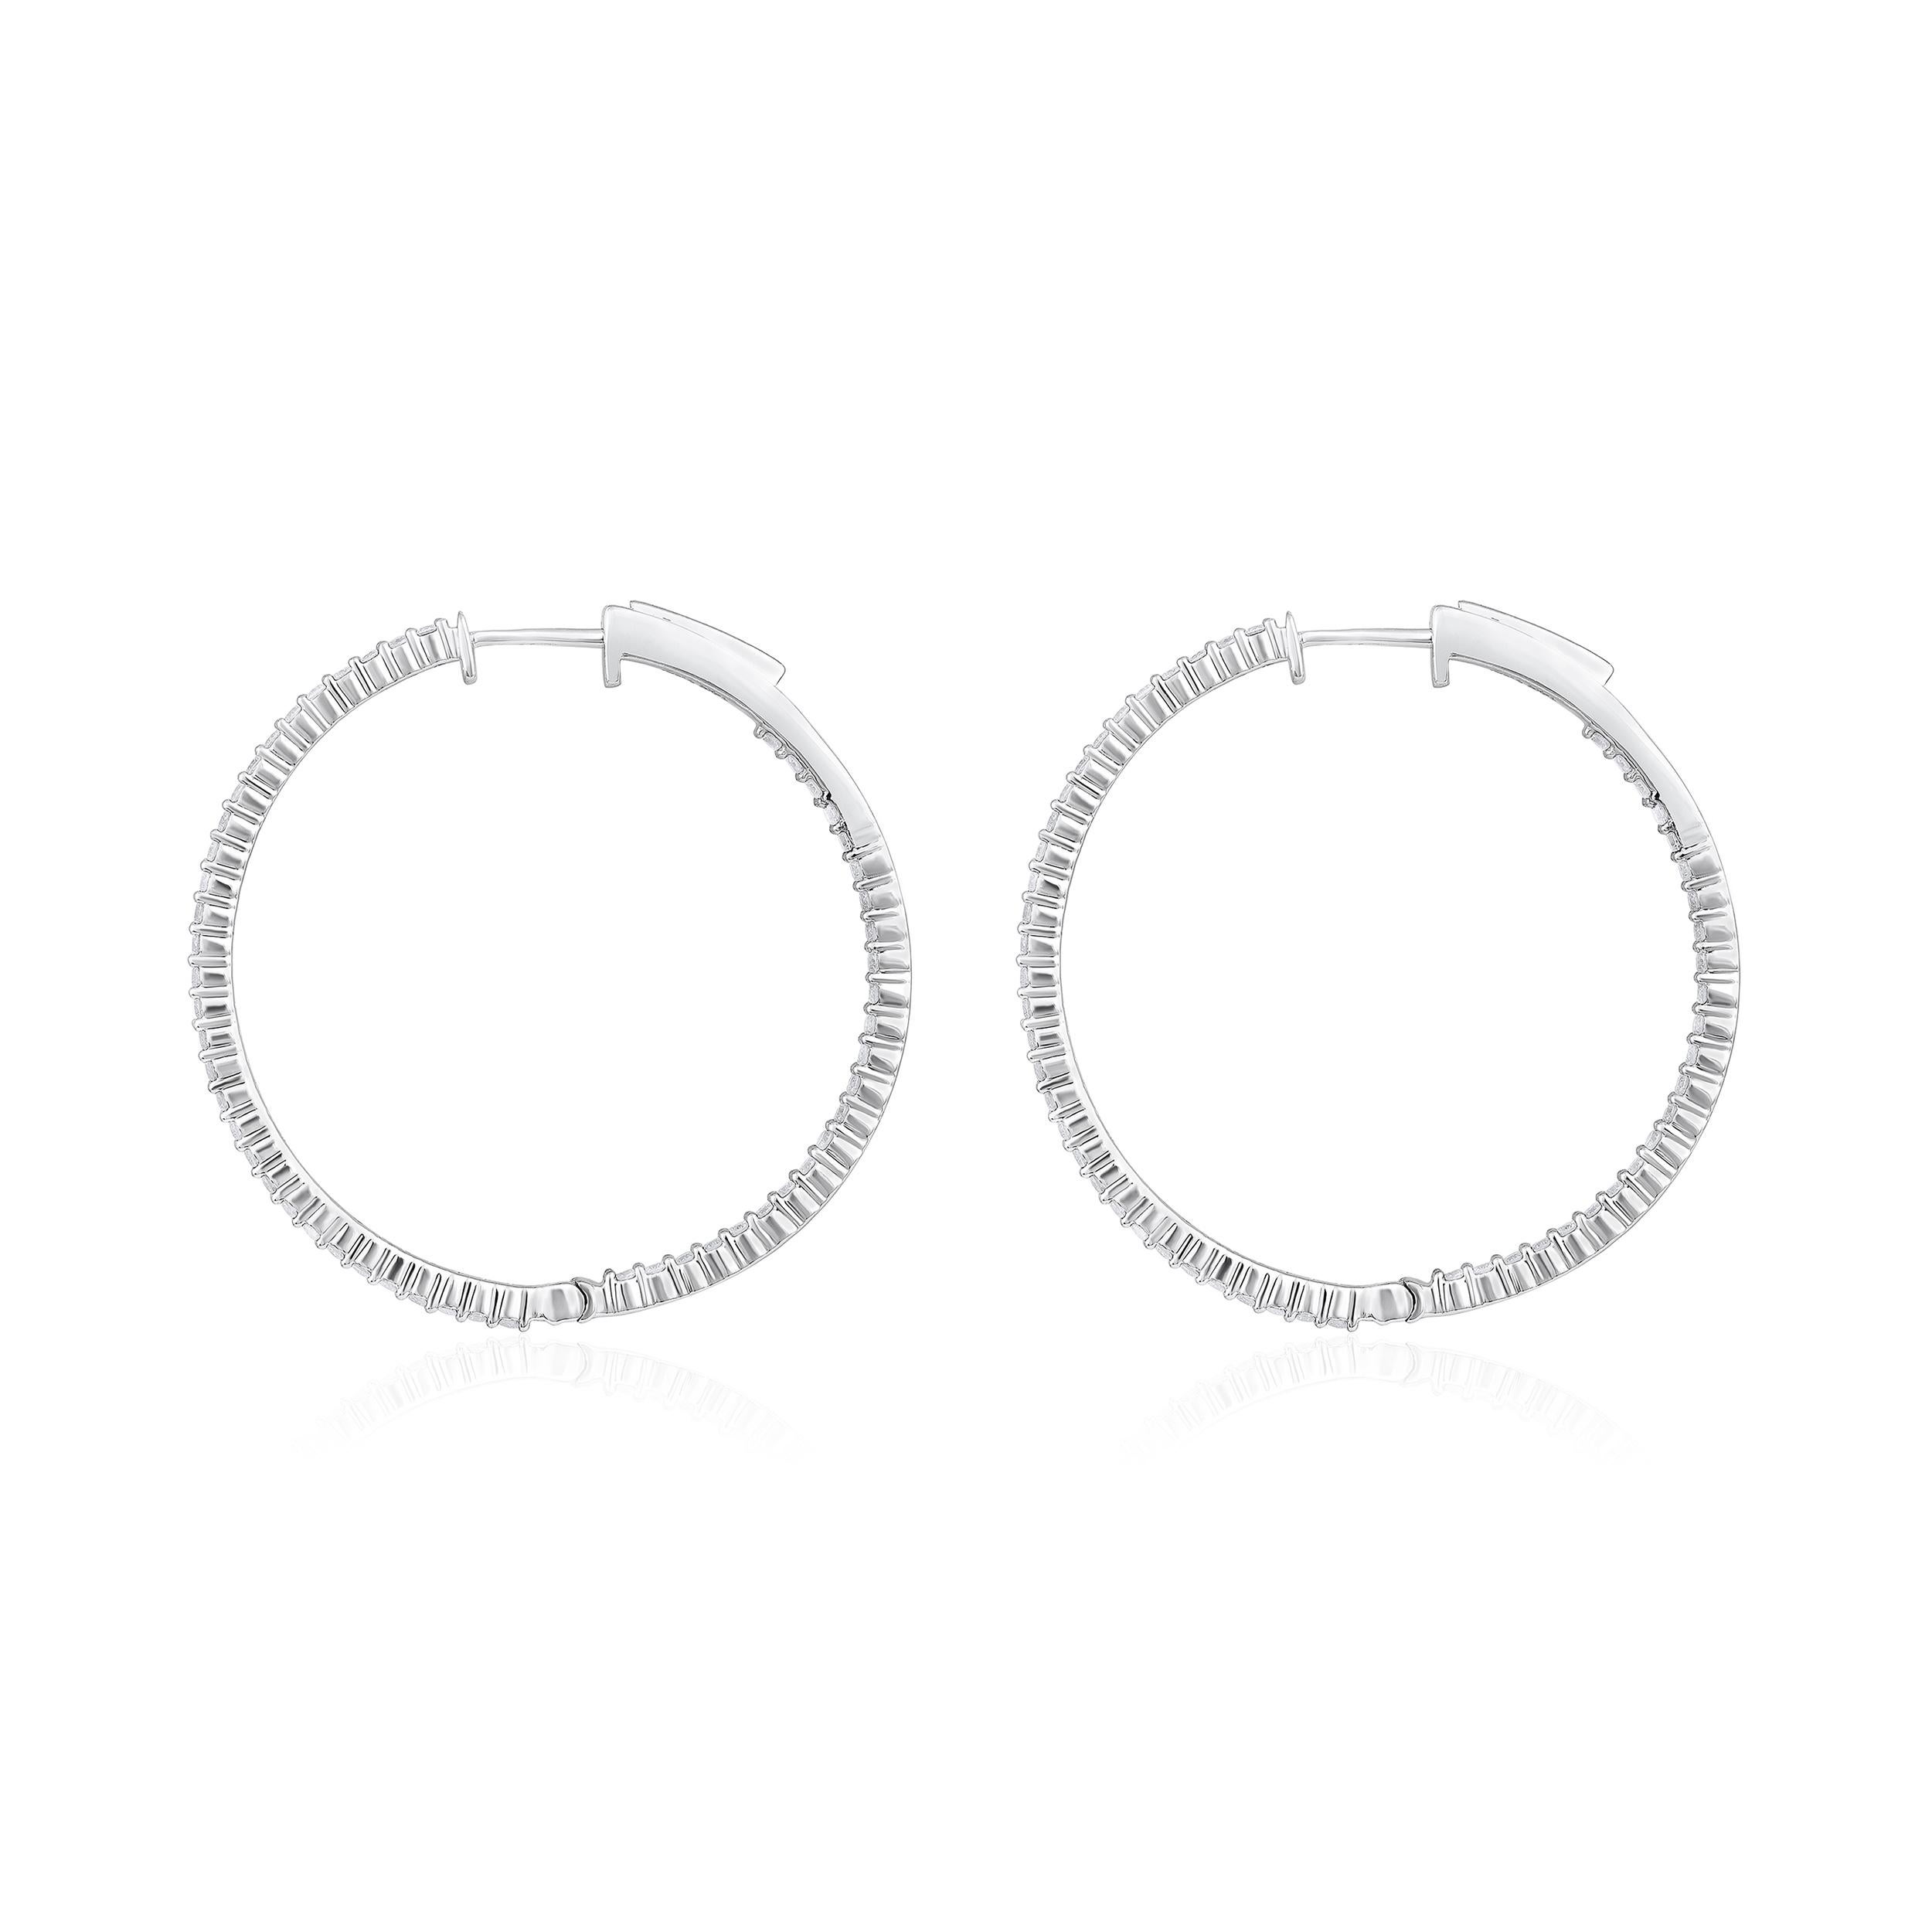 Brilliant Cut Certified 14k Gold 1.36 Carat Natural Diamond Round Inside Out Hoop Earrings For Sale